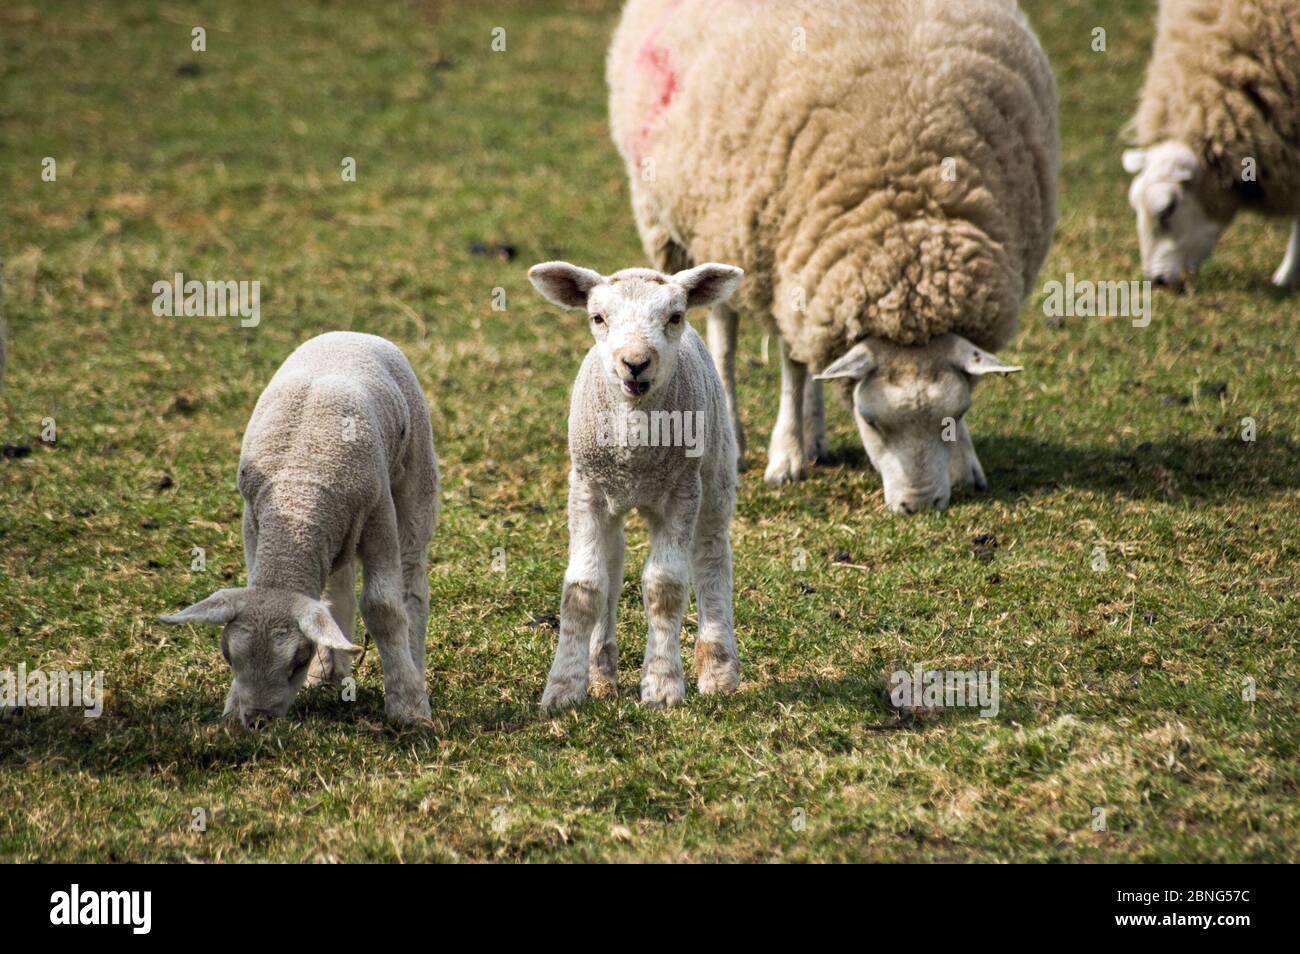 A curious lamb gazes at the viewer as its twin and other sheep continue grazing in a field. Stock Photo